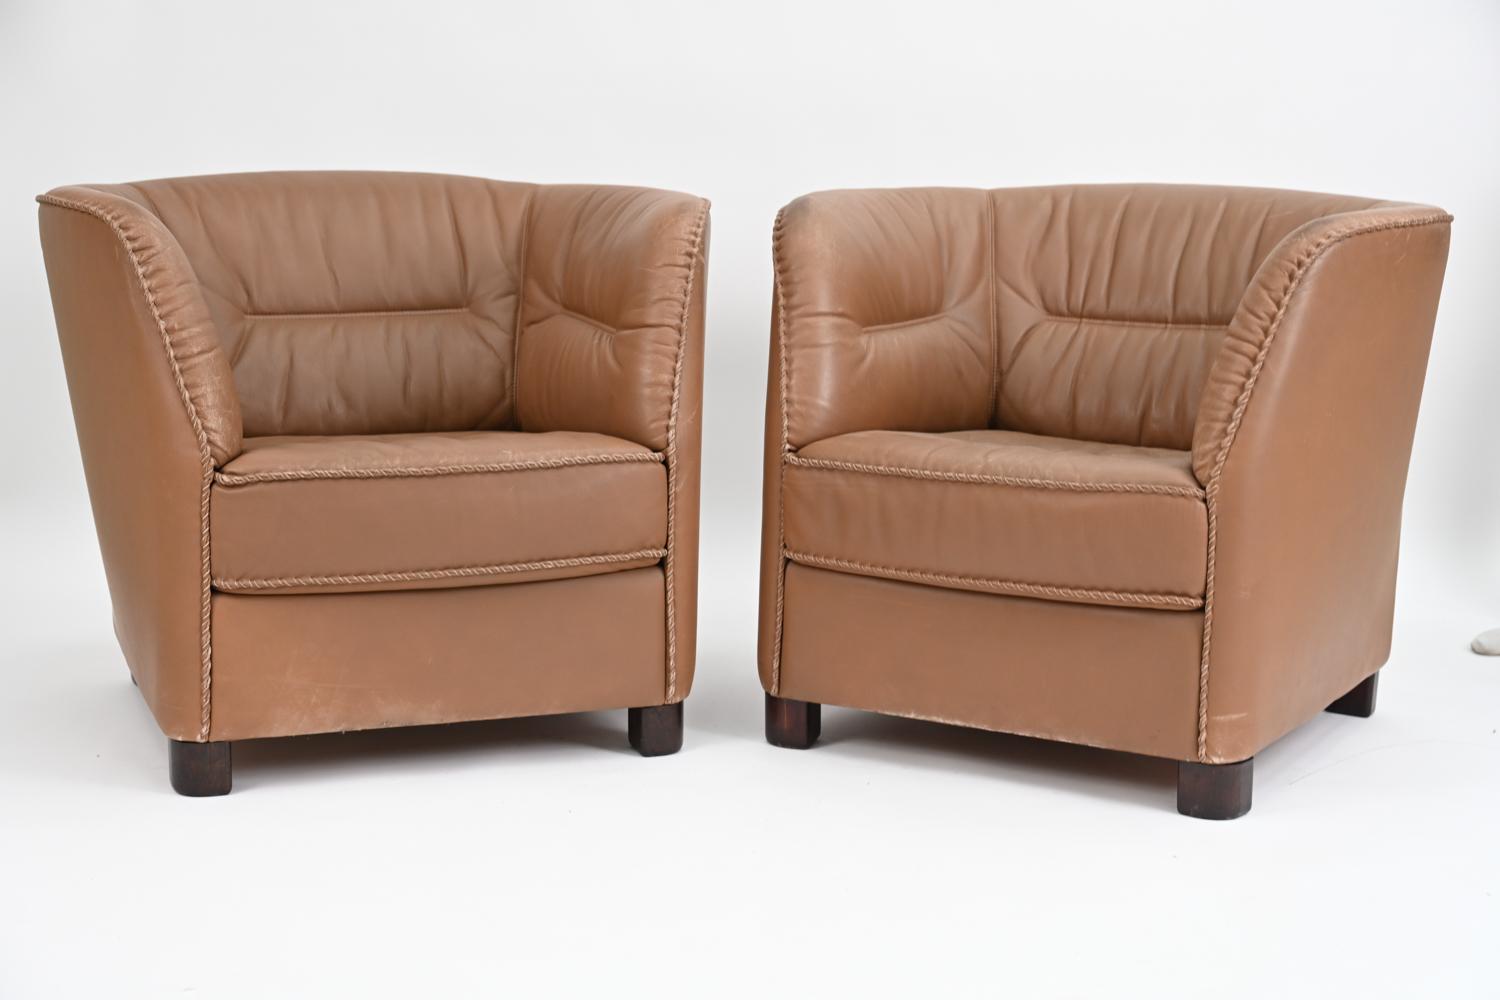 Pair of Danish Modern Leather Whipstitched Lounge Chairs by Berg Furniture 5